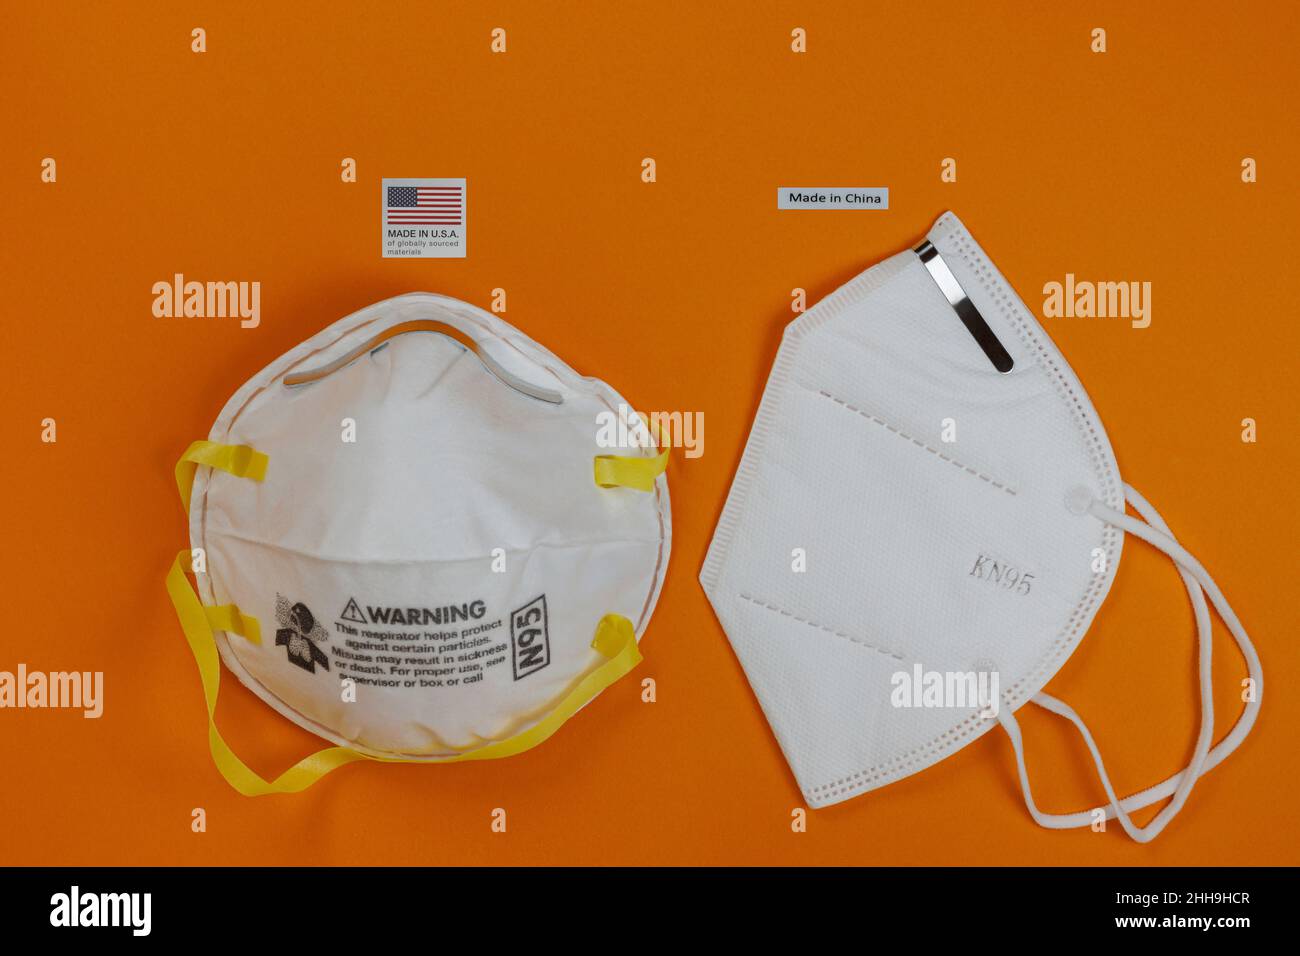 N95 respirator face mask made in USA next to a KN95 face mask made in China, with labels above, on an orange background Stock Photo